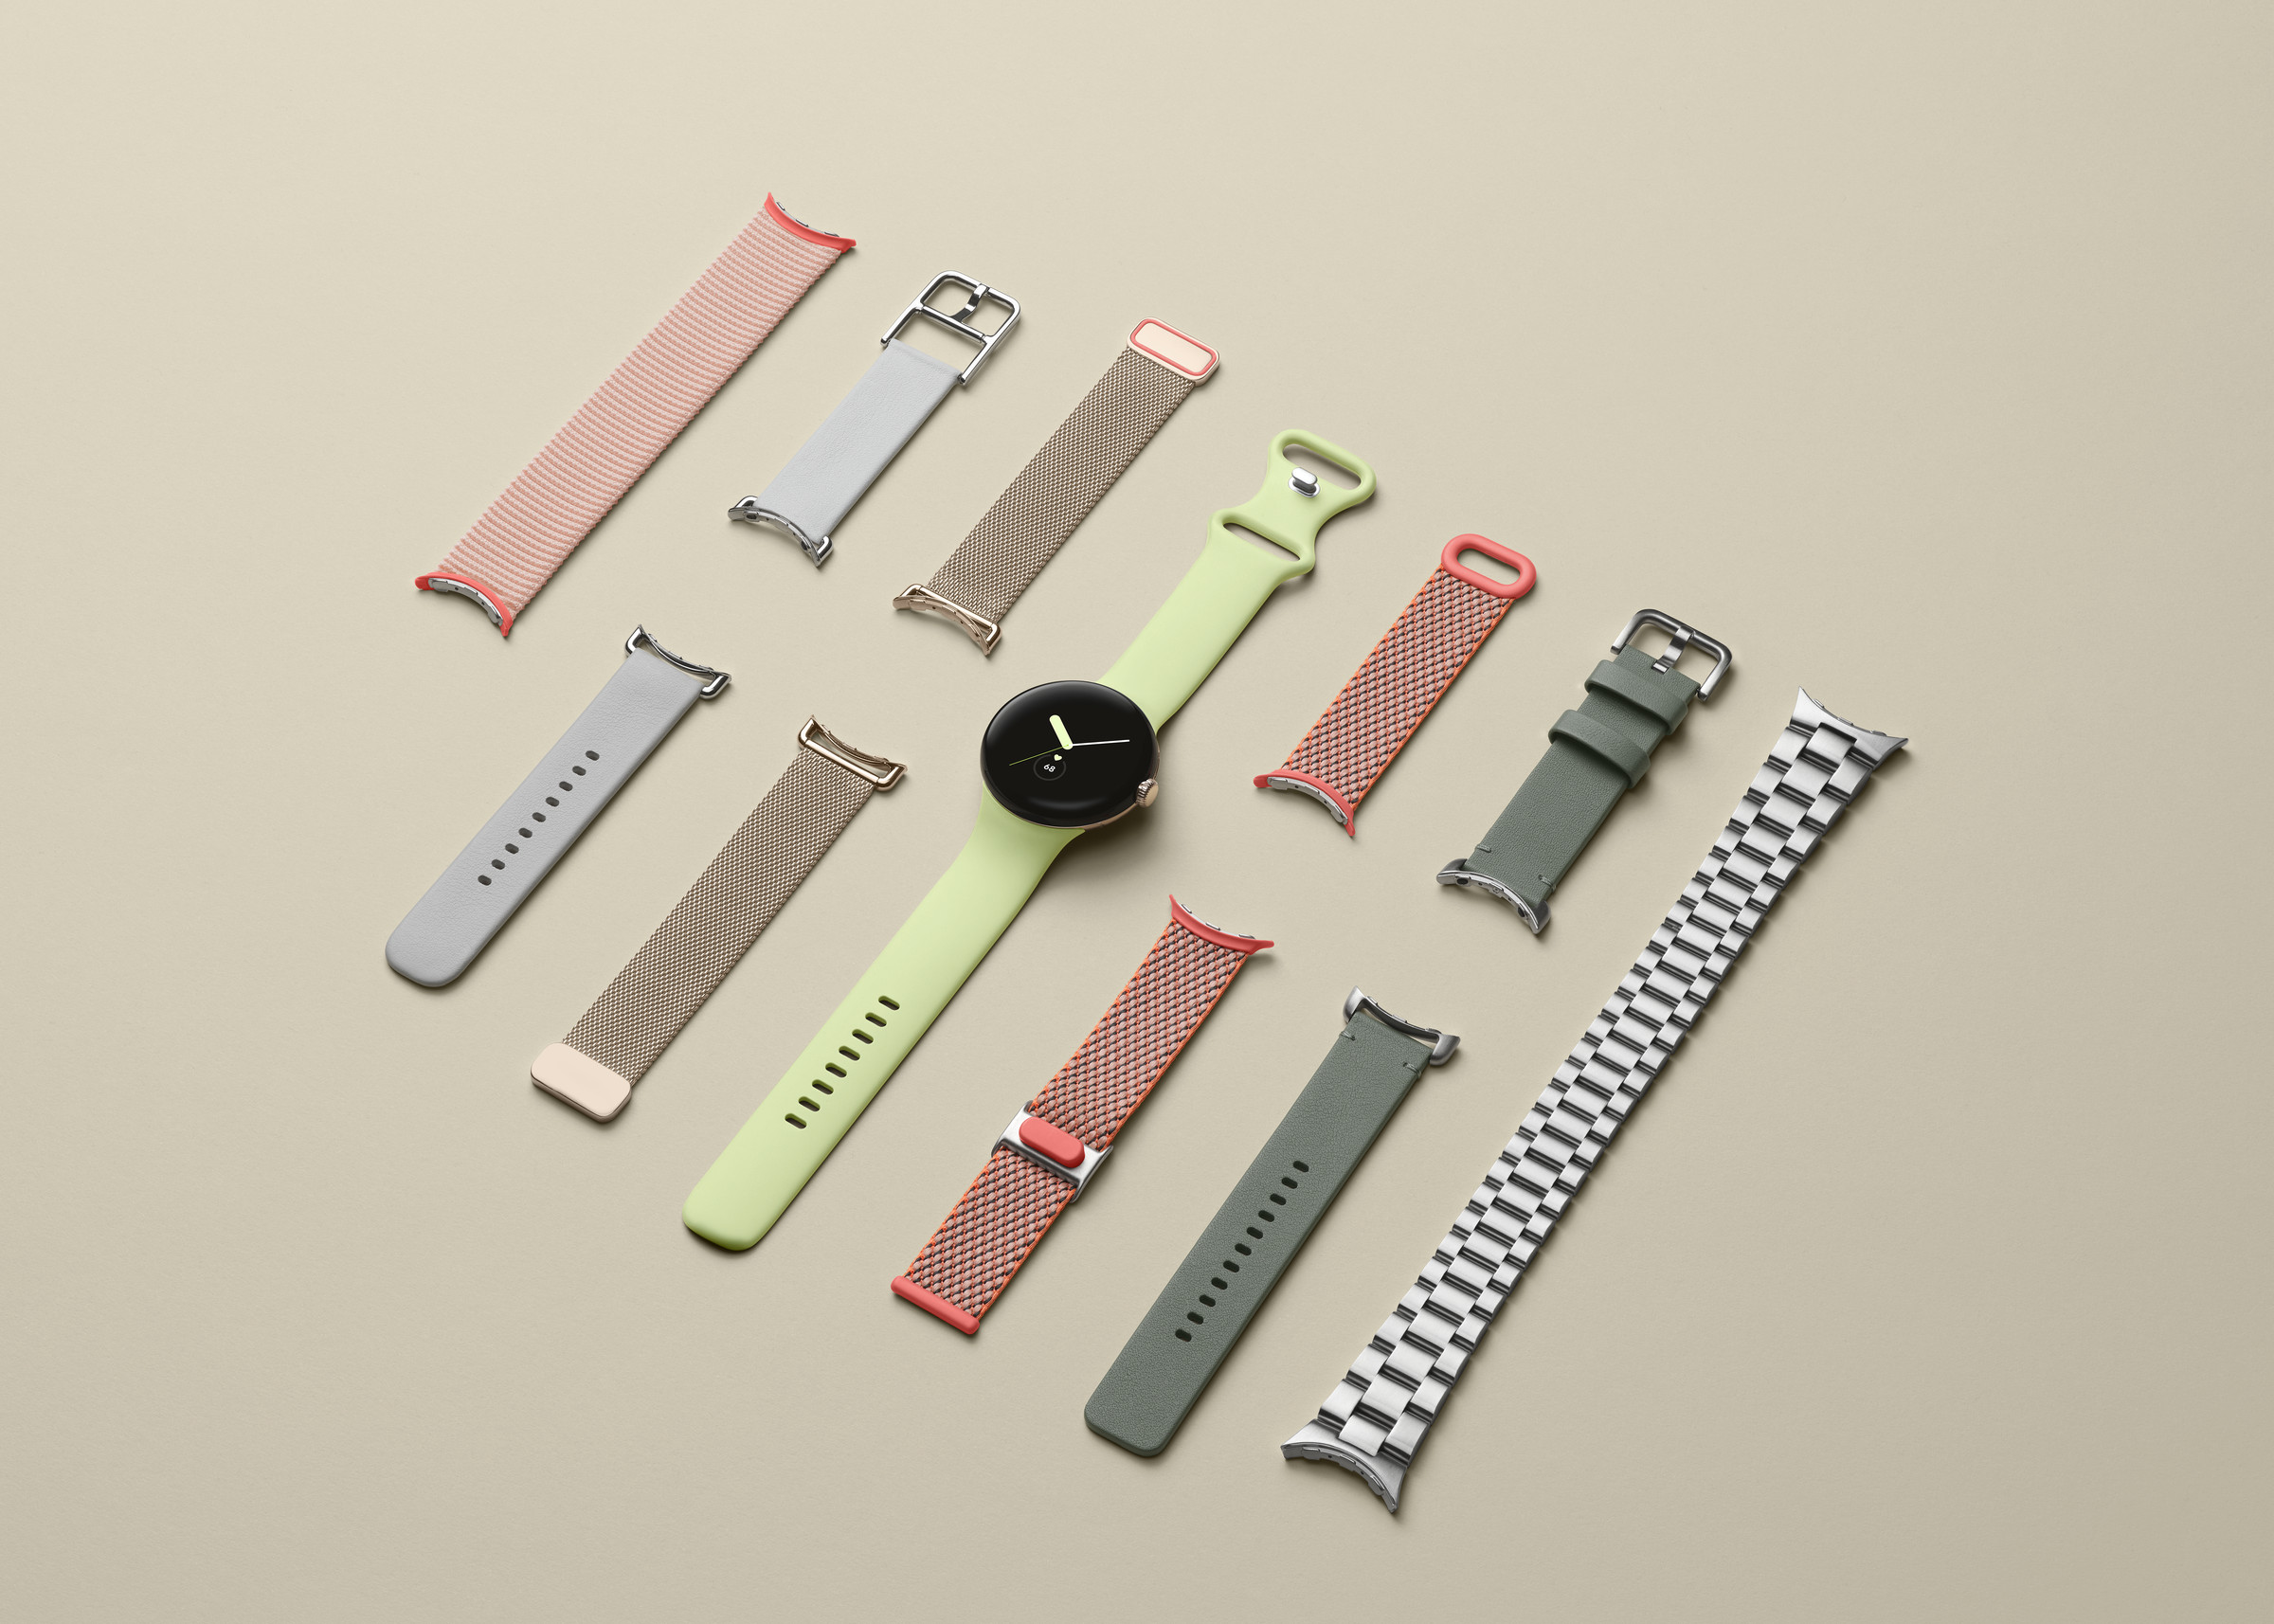 Pixel watch with all the band options laid out on the left and right sides.